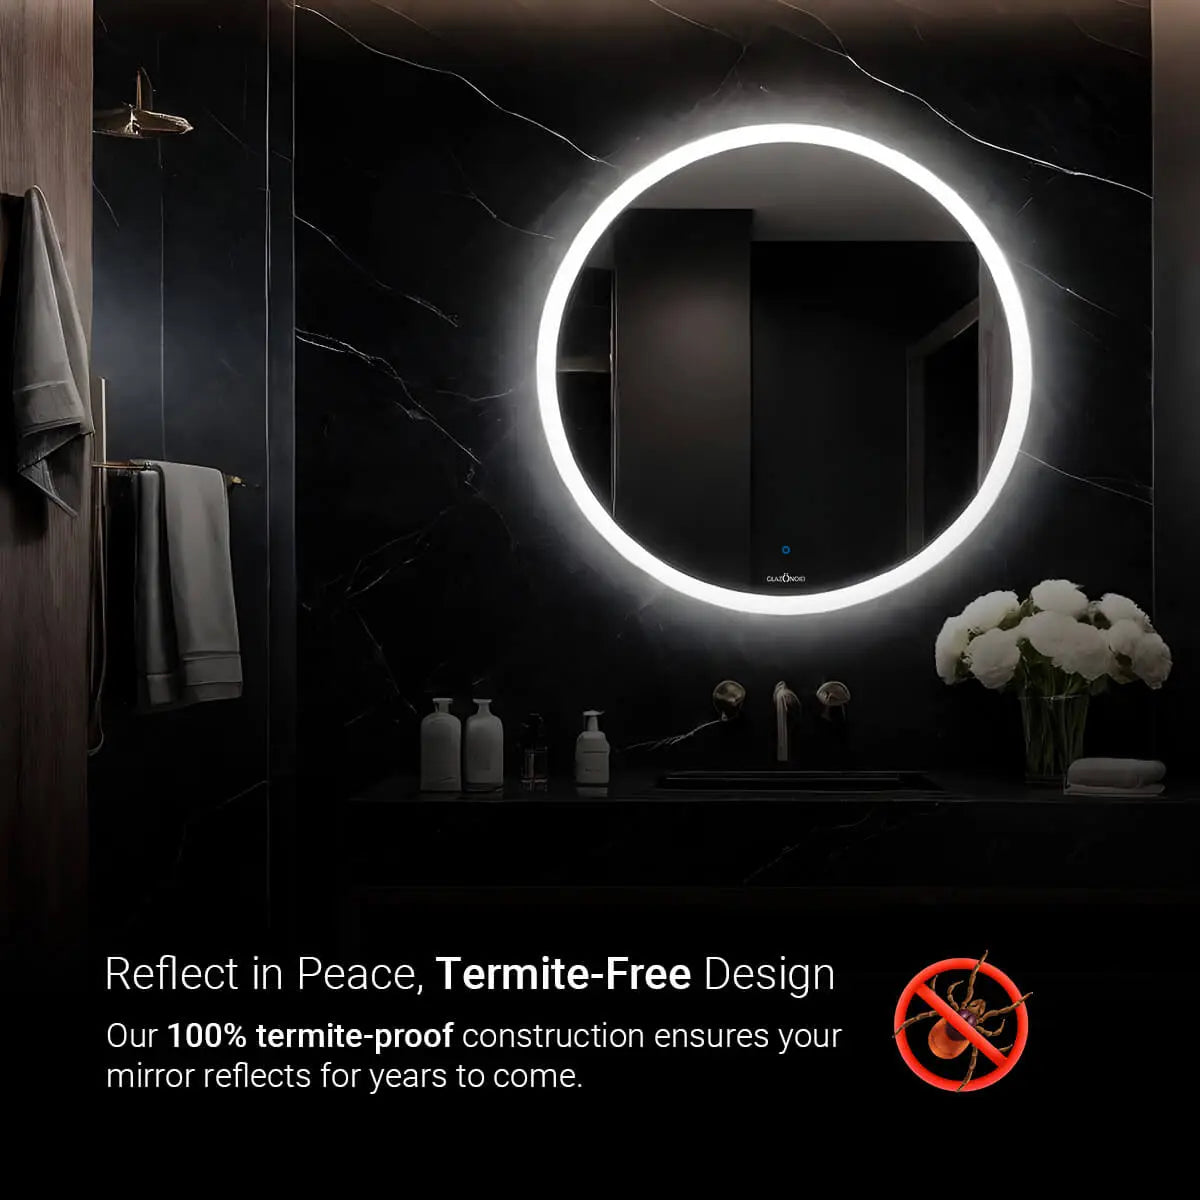 Modern, Round illuminated bathroom mirror built with such a material that is totally termite free. This mirror is perfect for shaving, applying makeup, or styling your hair. Text overlay says "Reflect in Peace. Termite-Free Design. Our 100% termite-proof construction ensures your mirror reflects for years to come."